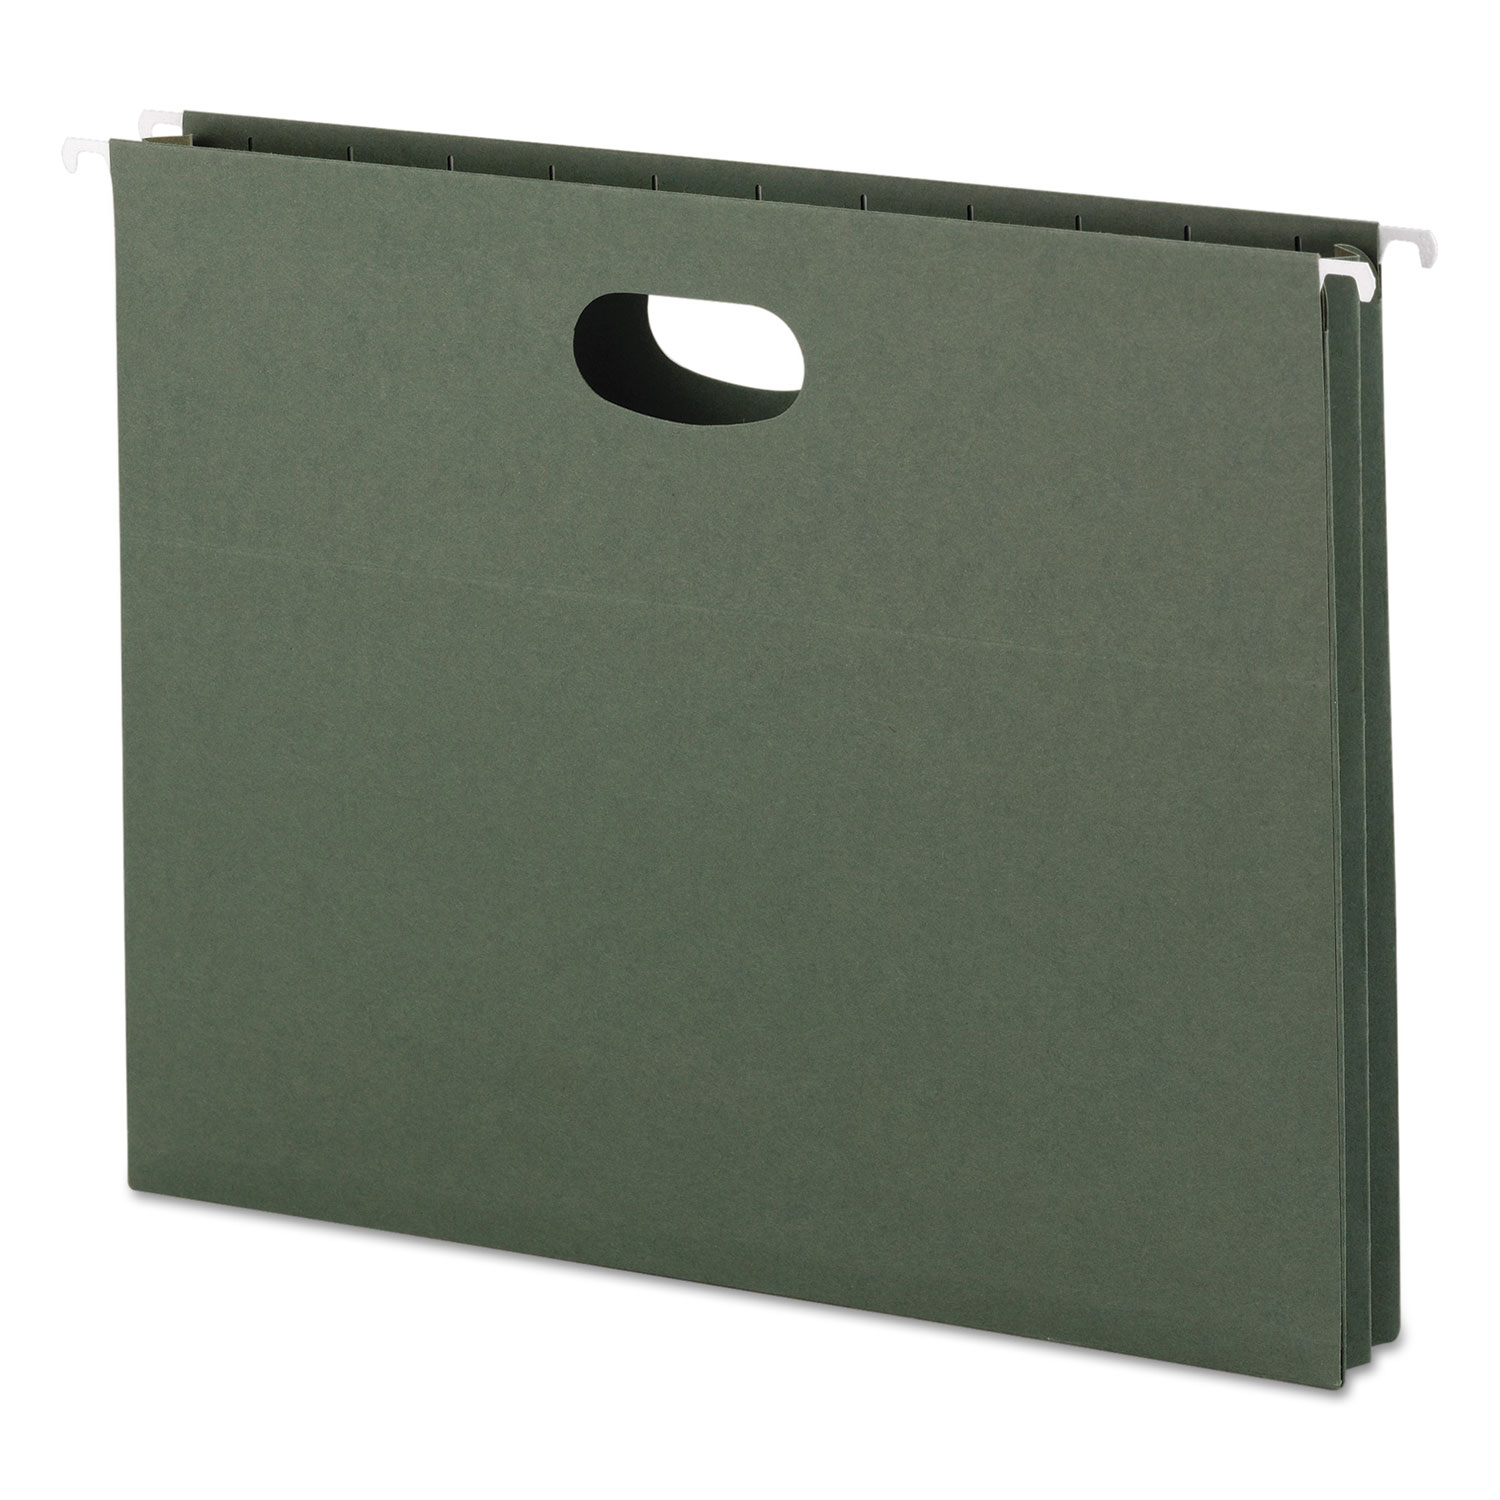  Smead 64218 Hanging Pockets with Full-Height Gusset, Letter Size, Straight Tab, Standard Green, 25/Box (SMD64218) 